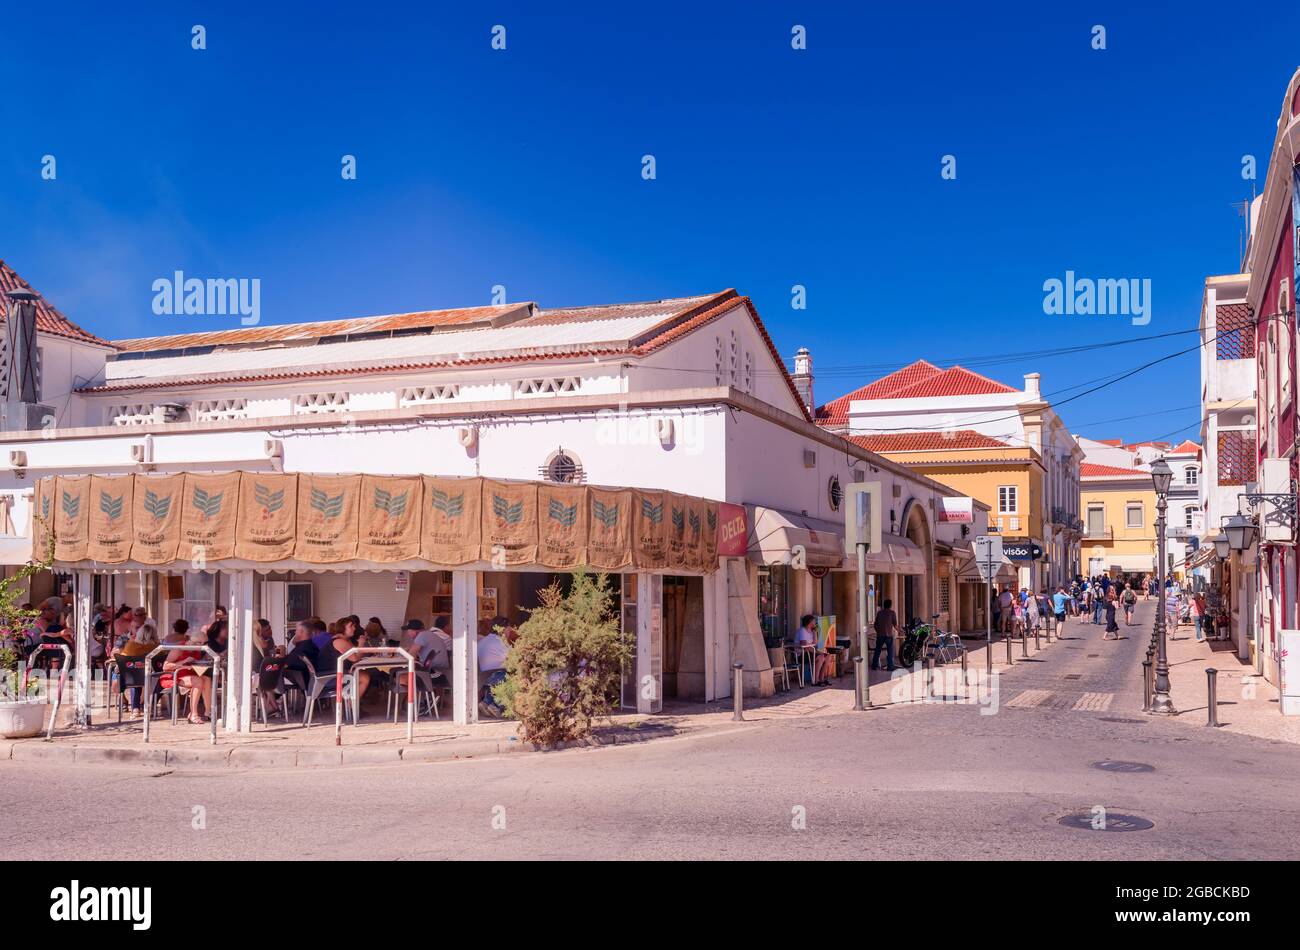 People eating and drinking in a street restaurant at Silves Algarve Portugal Stock Photo